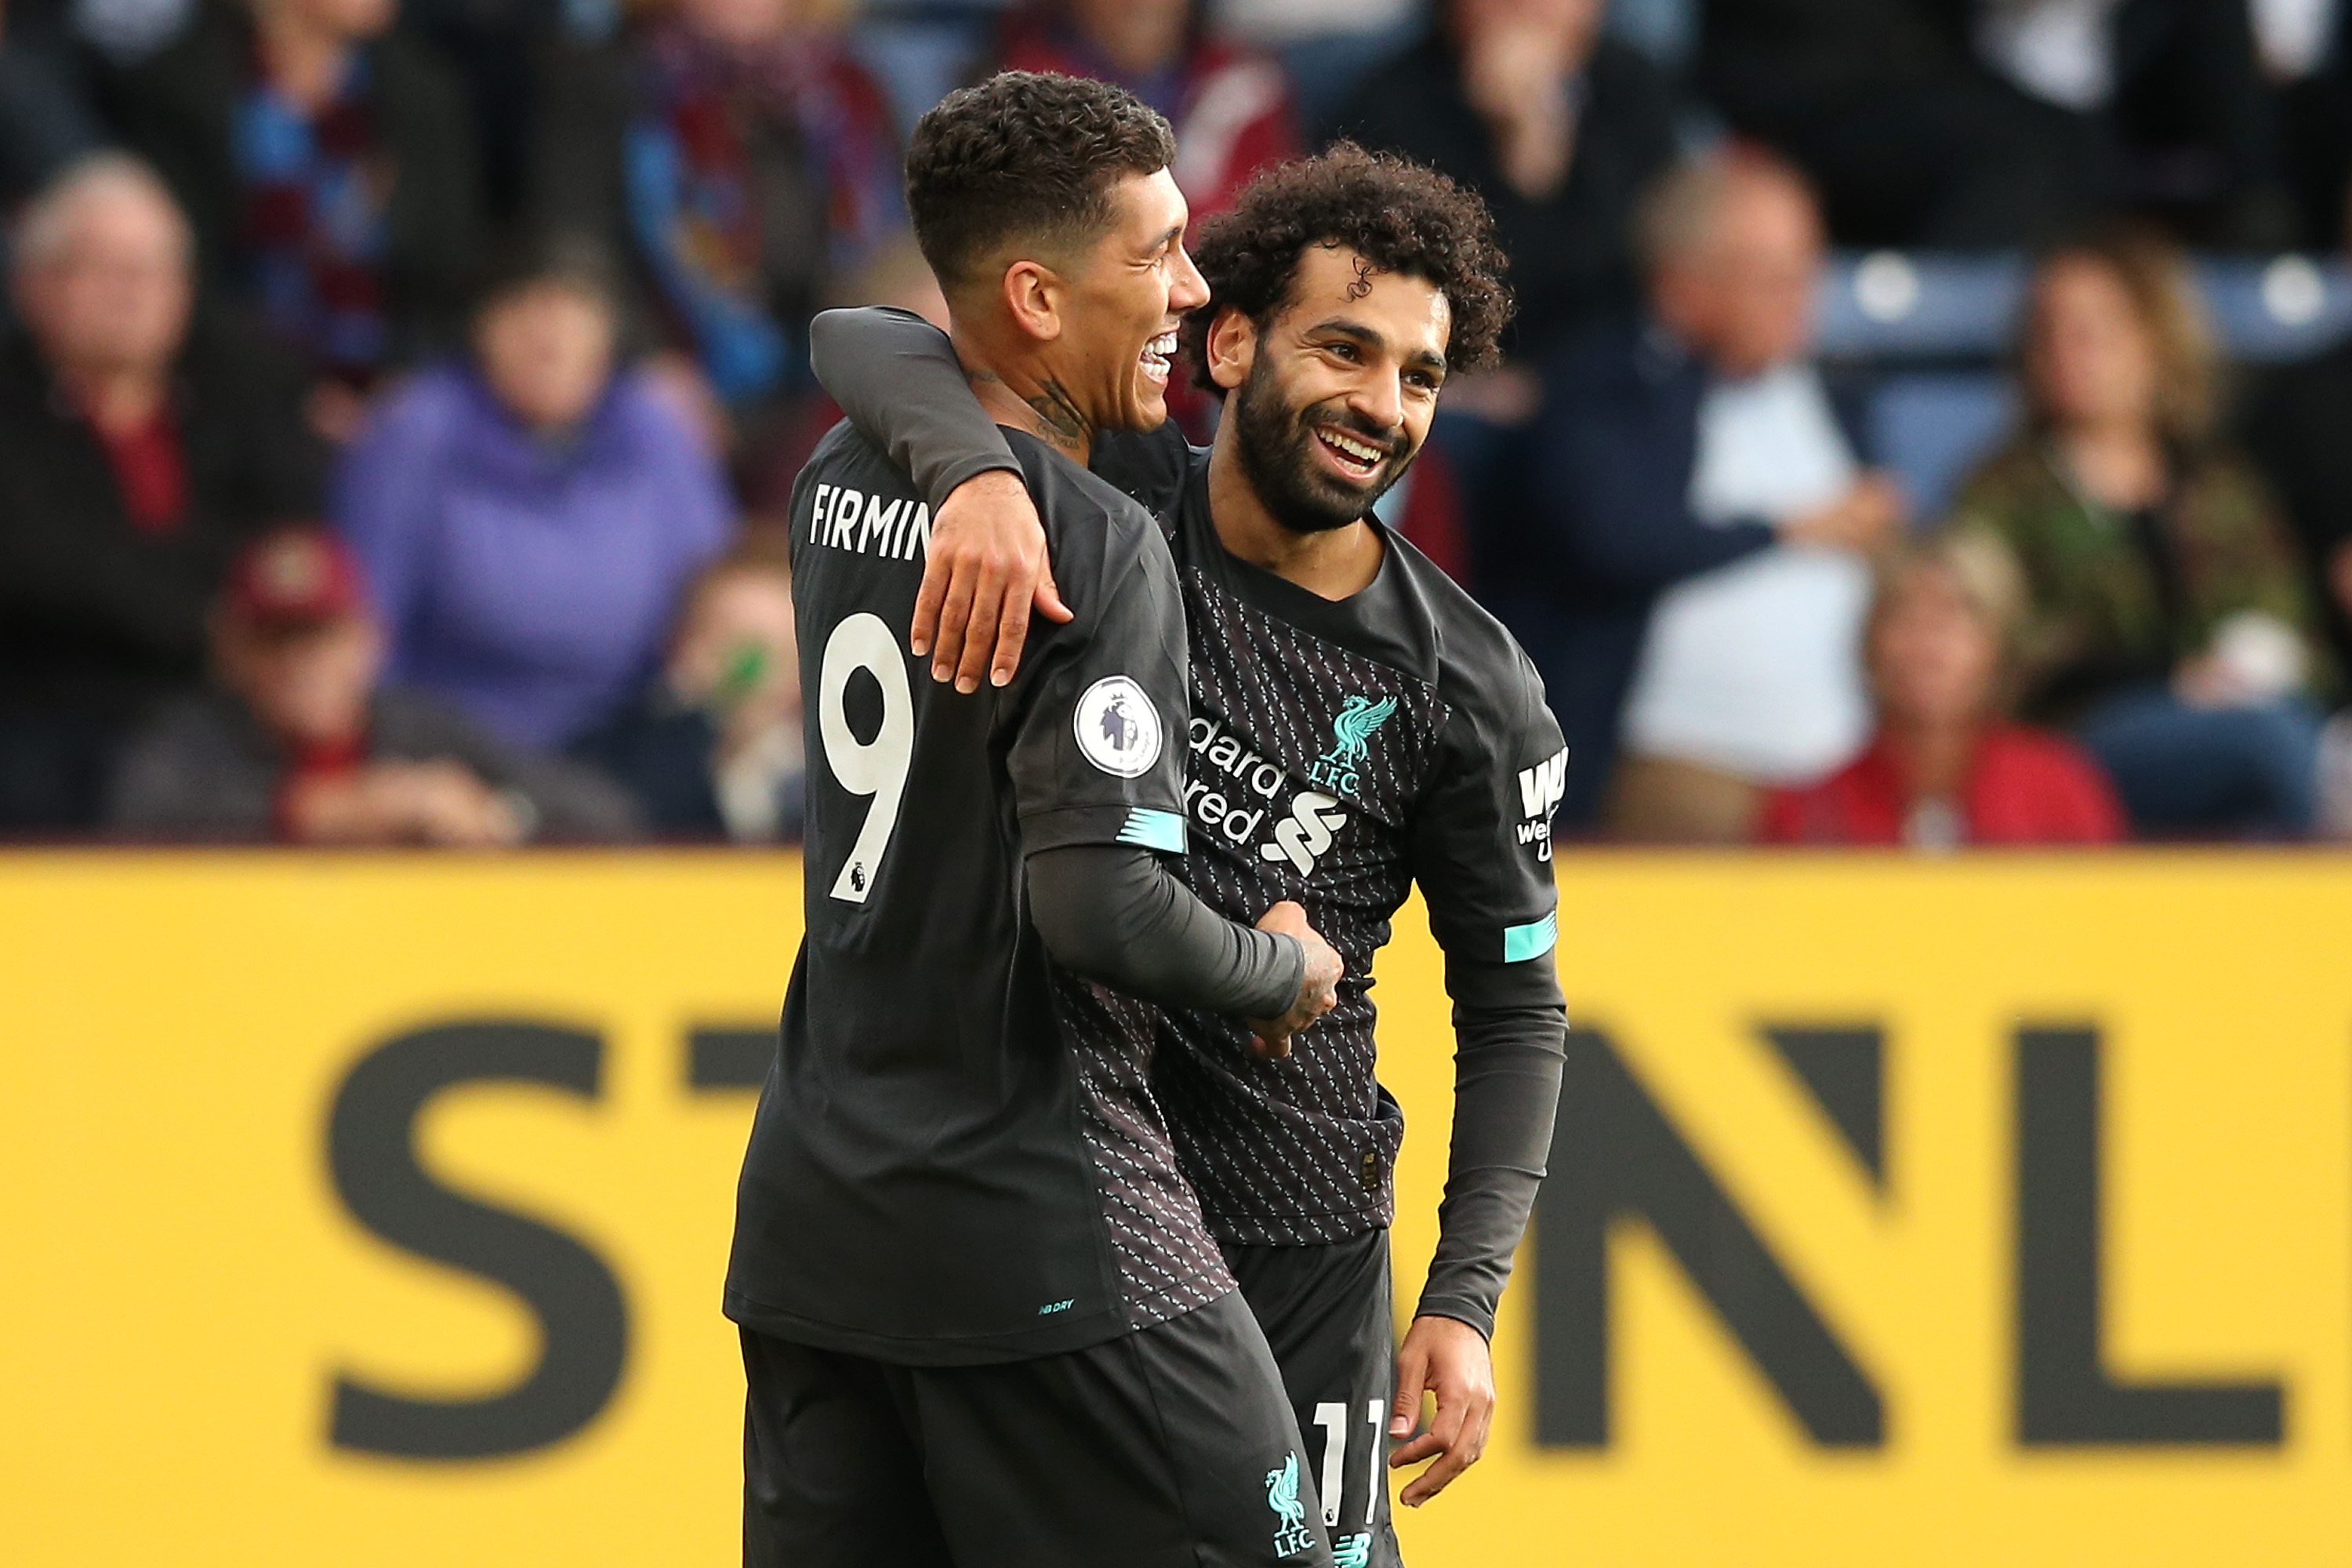 BURNLEY, ENGLAND - AUGUST 31: Roberto Firmino of Liverpool celebrates with teammate Mohamed Salah after scoring his team's third goal  during the Premier League match between Burnley FC and Liverpool FC at Turf Moor on August 31, 2019 in Burnley, United Kingdom. (Photo by Jan Kruger/Getty Images)